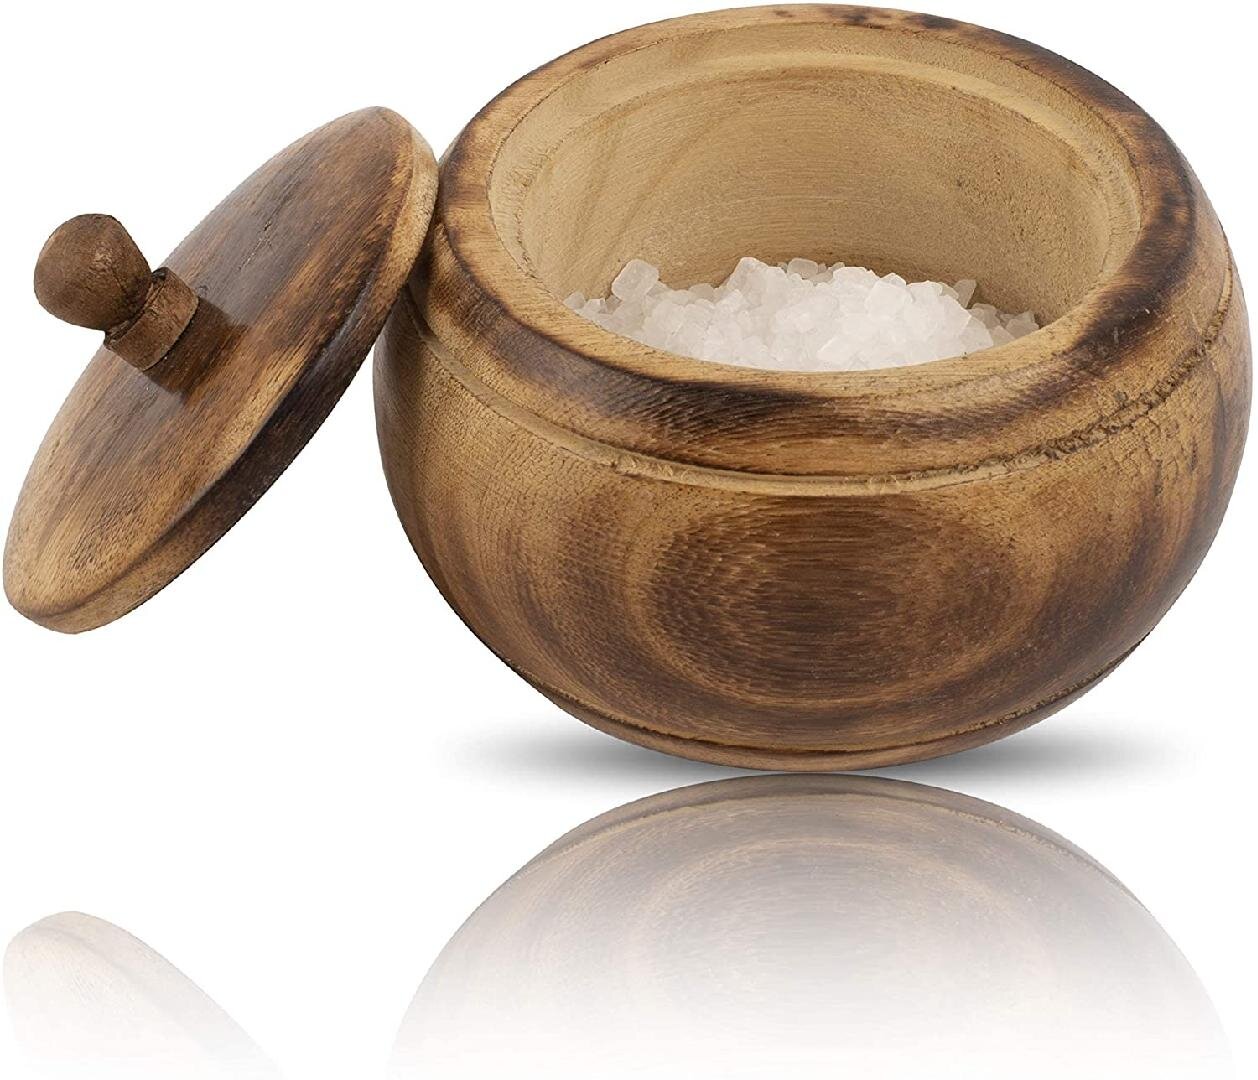 Decorative Rustic Wooden Sugar Bowl with Lid Wide Mouth Candy Treat Jar Spice Jar Holder Condiment Nuts Serving Bowl Pot Salt Spice Herb Loose Leaf Tea Storage Container Novelty Home & Kitchen 